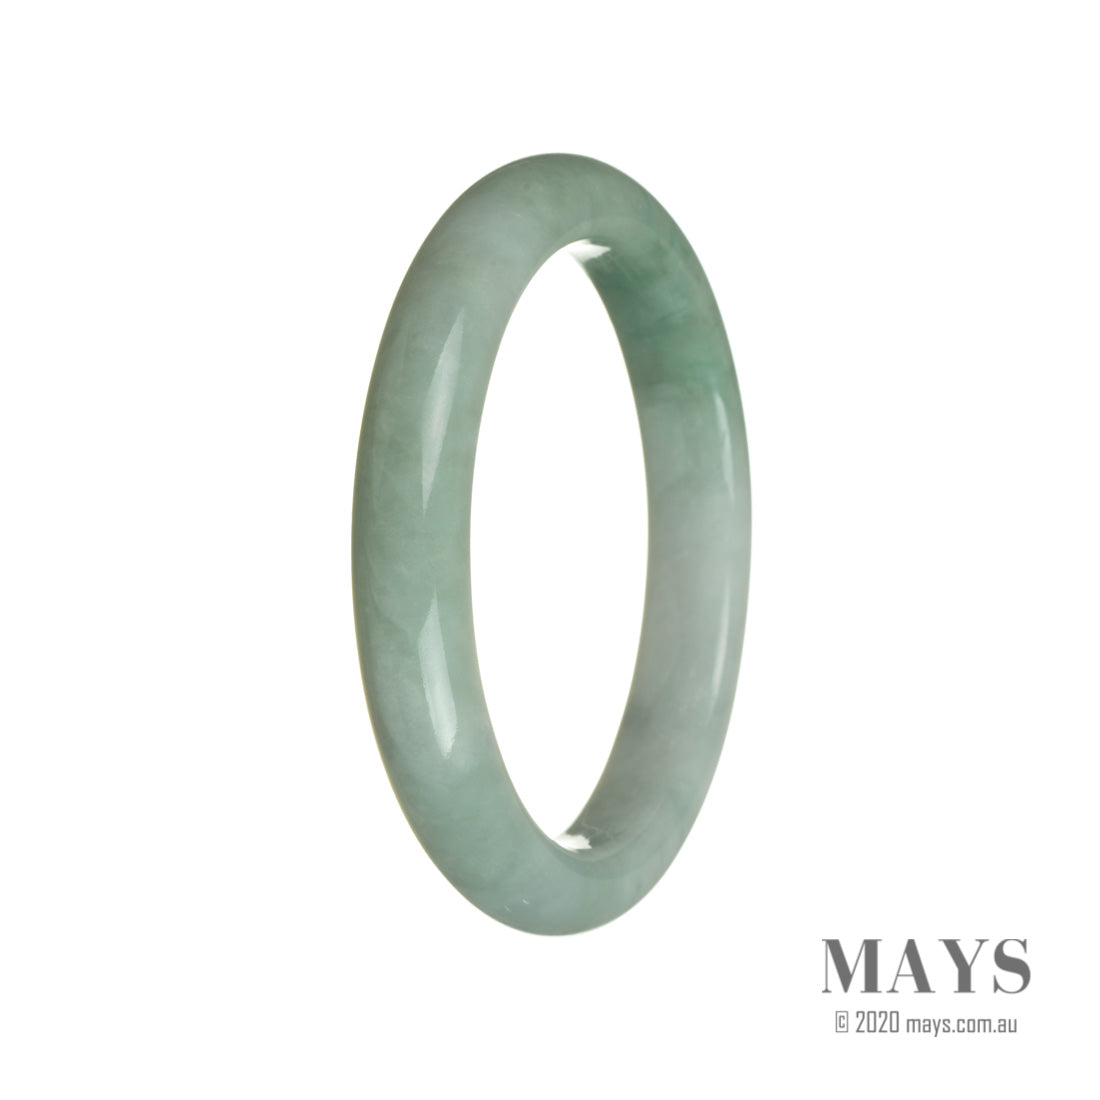 A close-up photo of a semi-round, untreated green with white jadeite bracelet. The bracelet has a smooth, polished surface and measures 63mm in diameter. It features vibrant shades of green and white, showcasing the natural beauty of the jadeite stone.